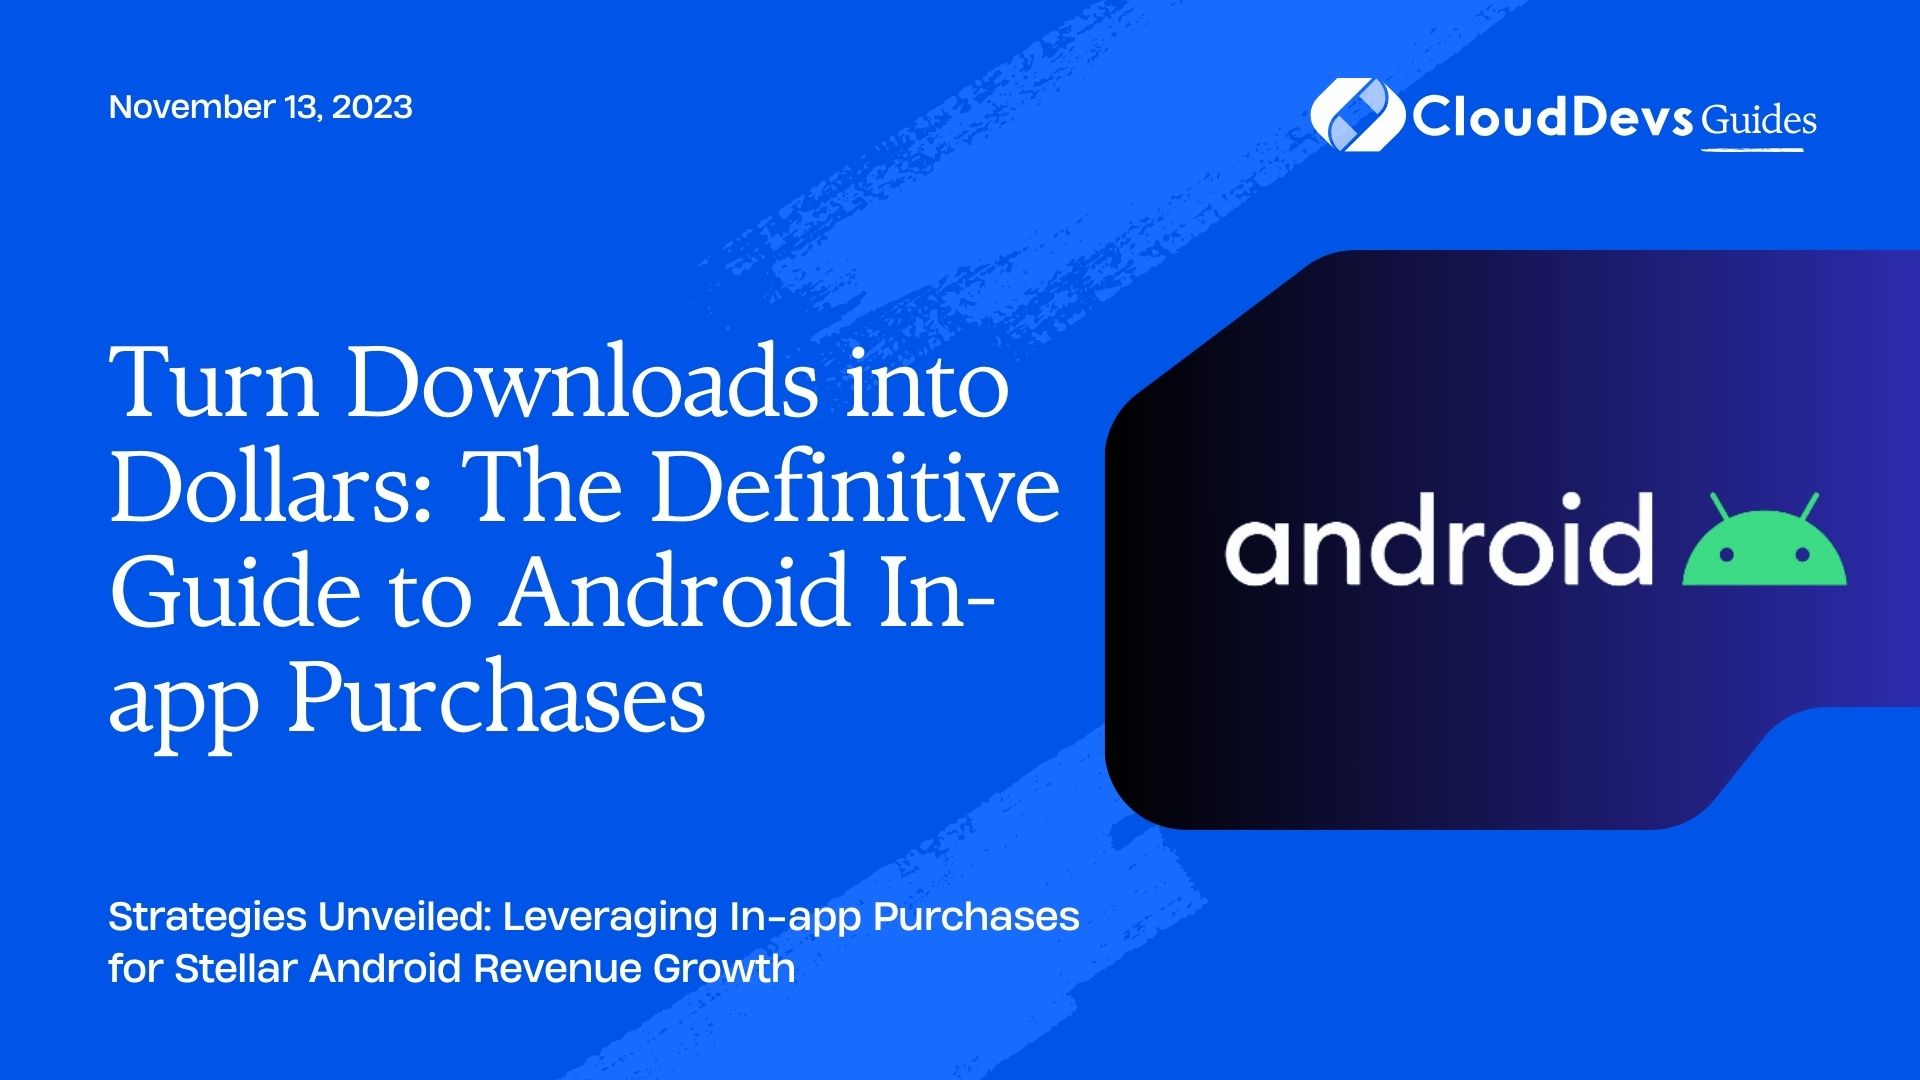 Turn Downloads into Dollars: The Definitive Guide to Android In-app Purchases